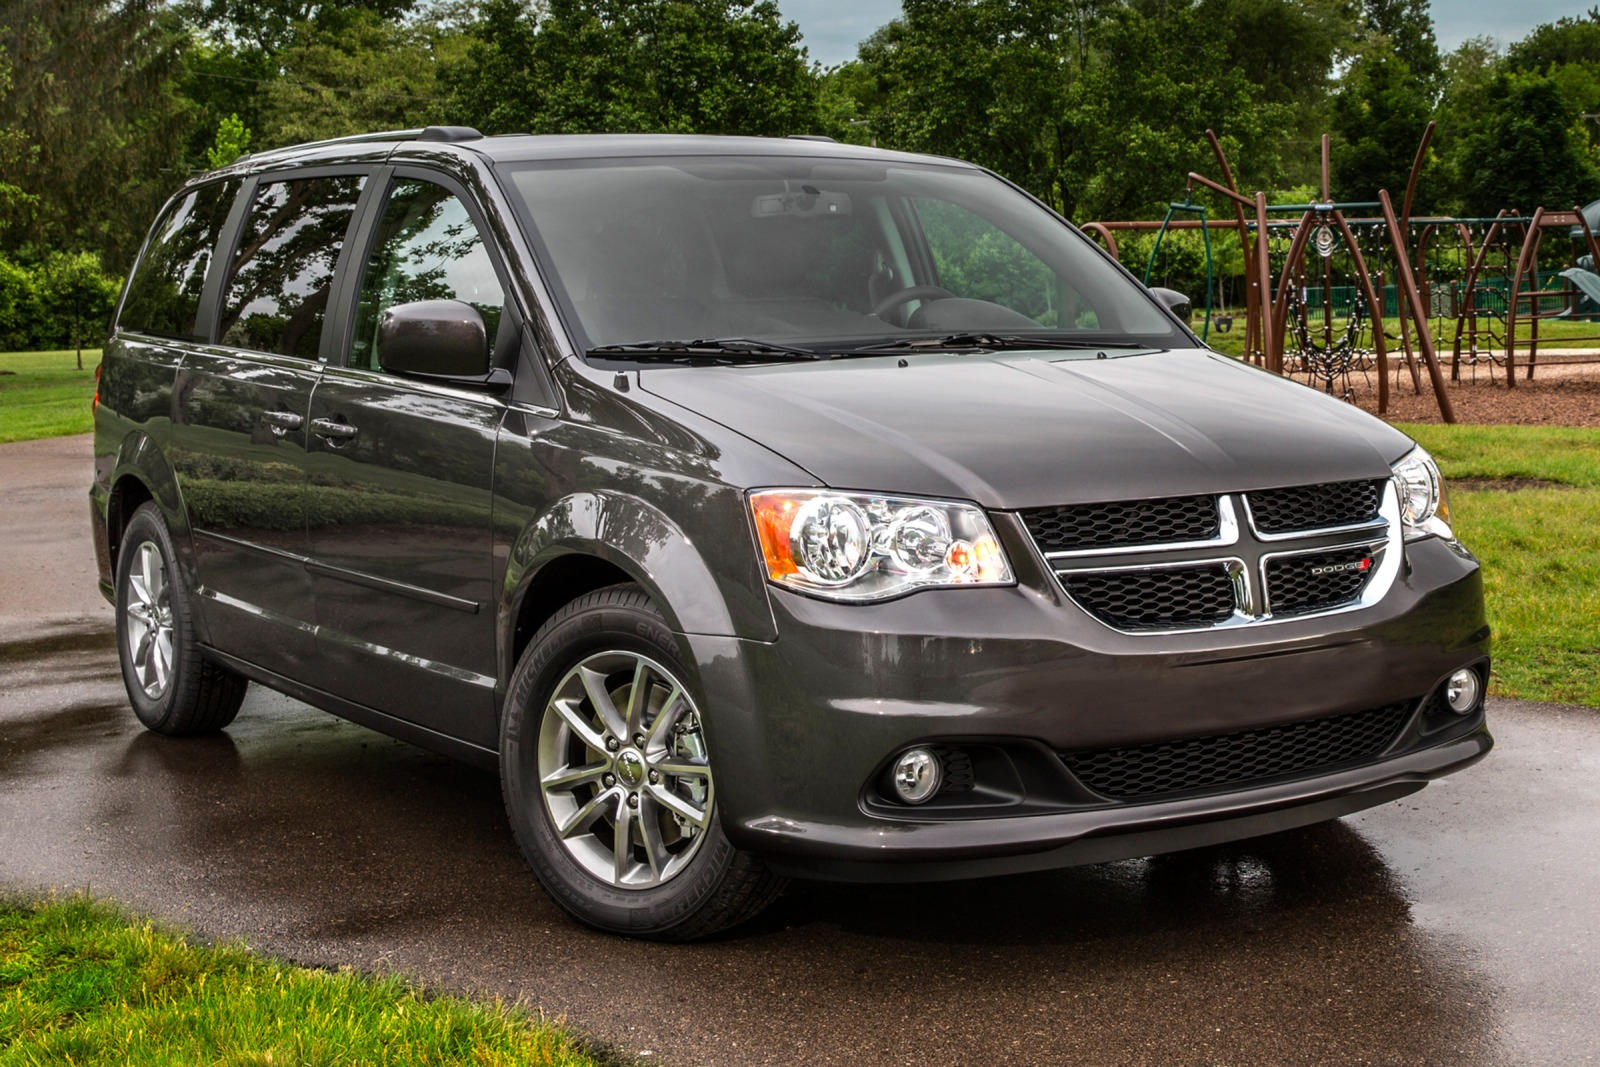 new dodge minivan for sale Used Dodge Grand Caravan For Sale in Bethany, CT  CarBuzz